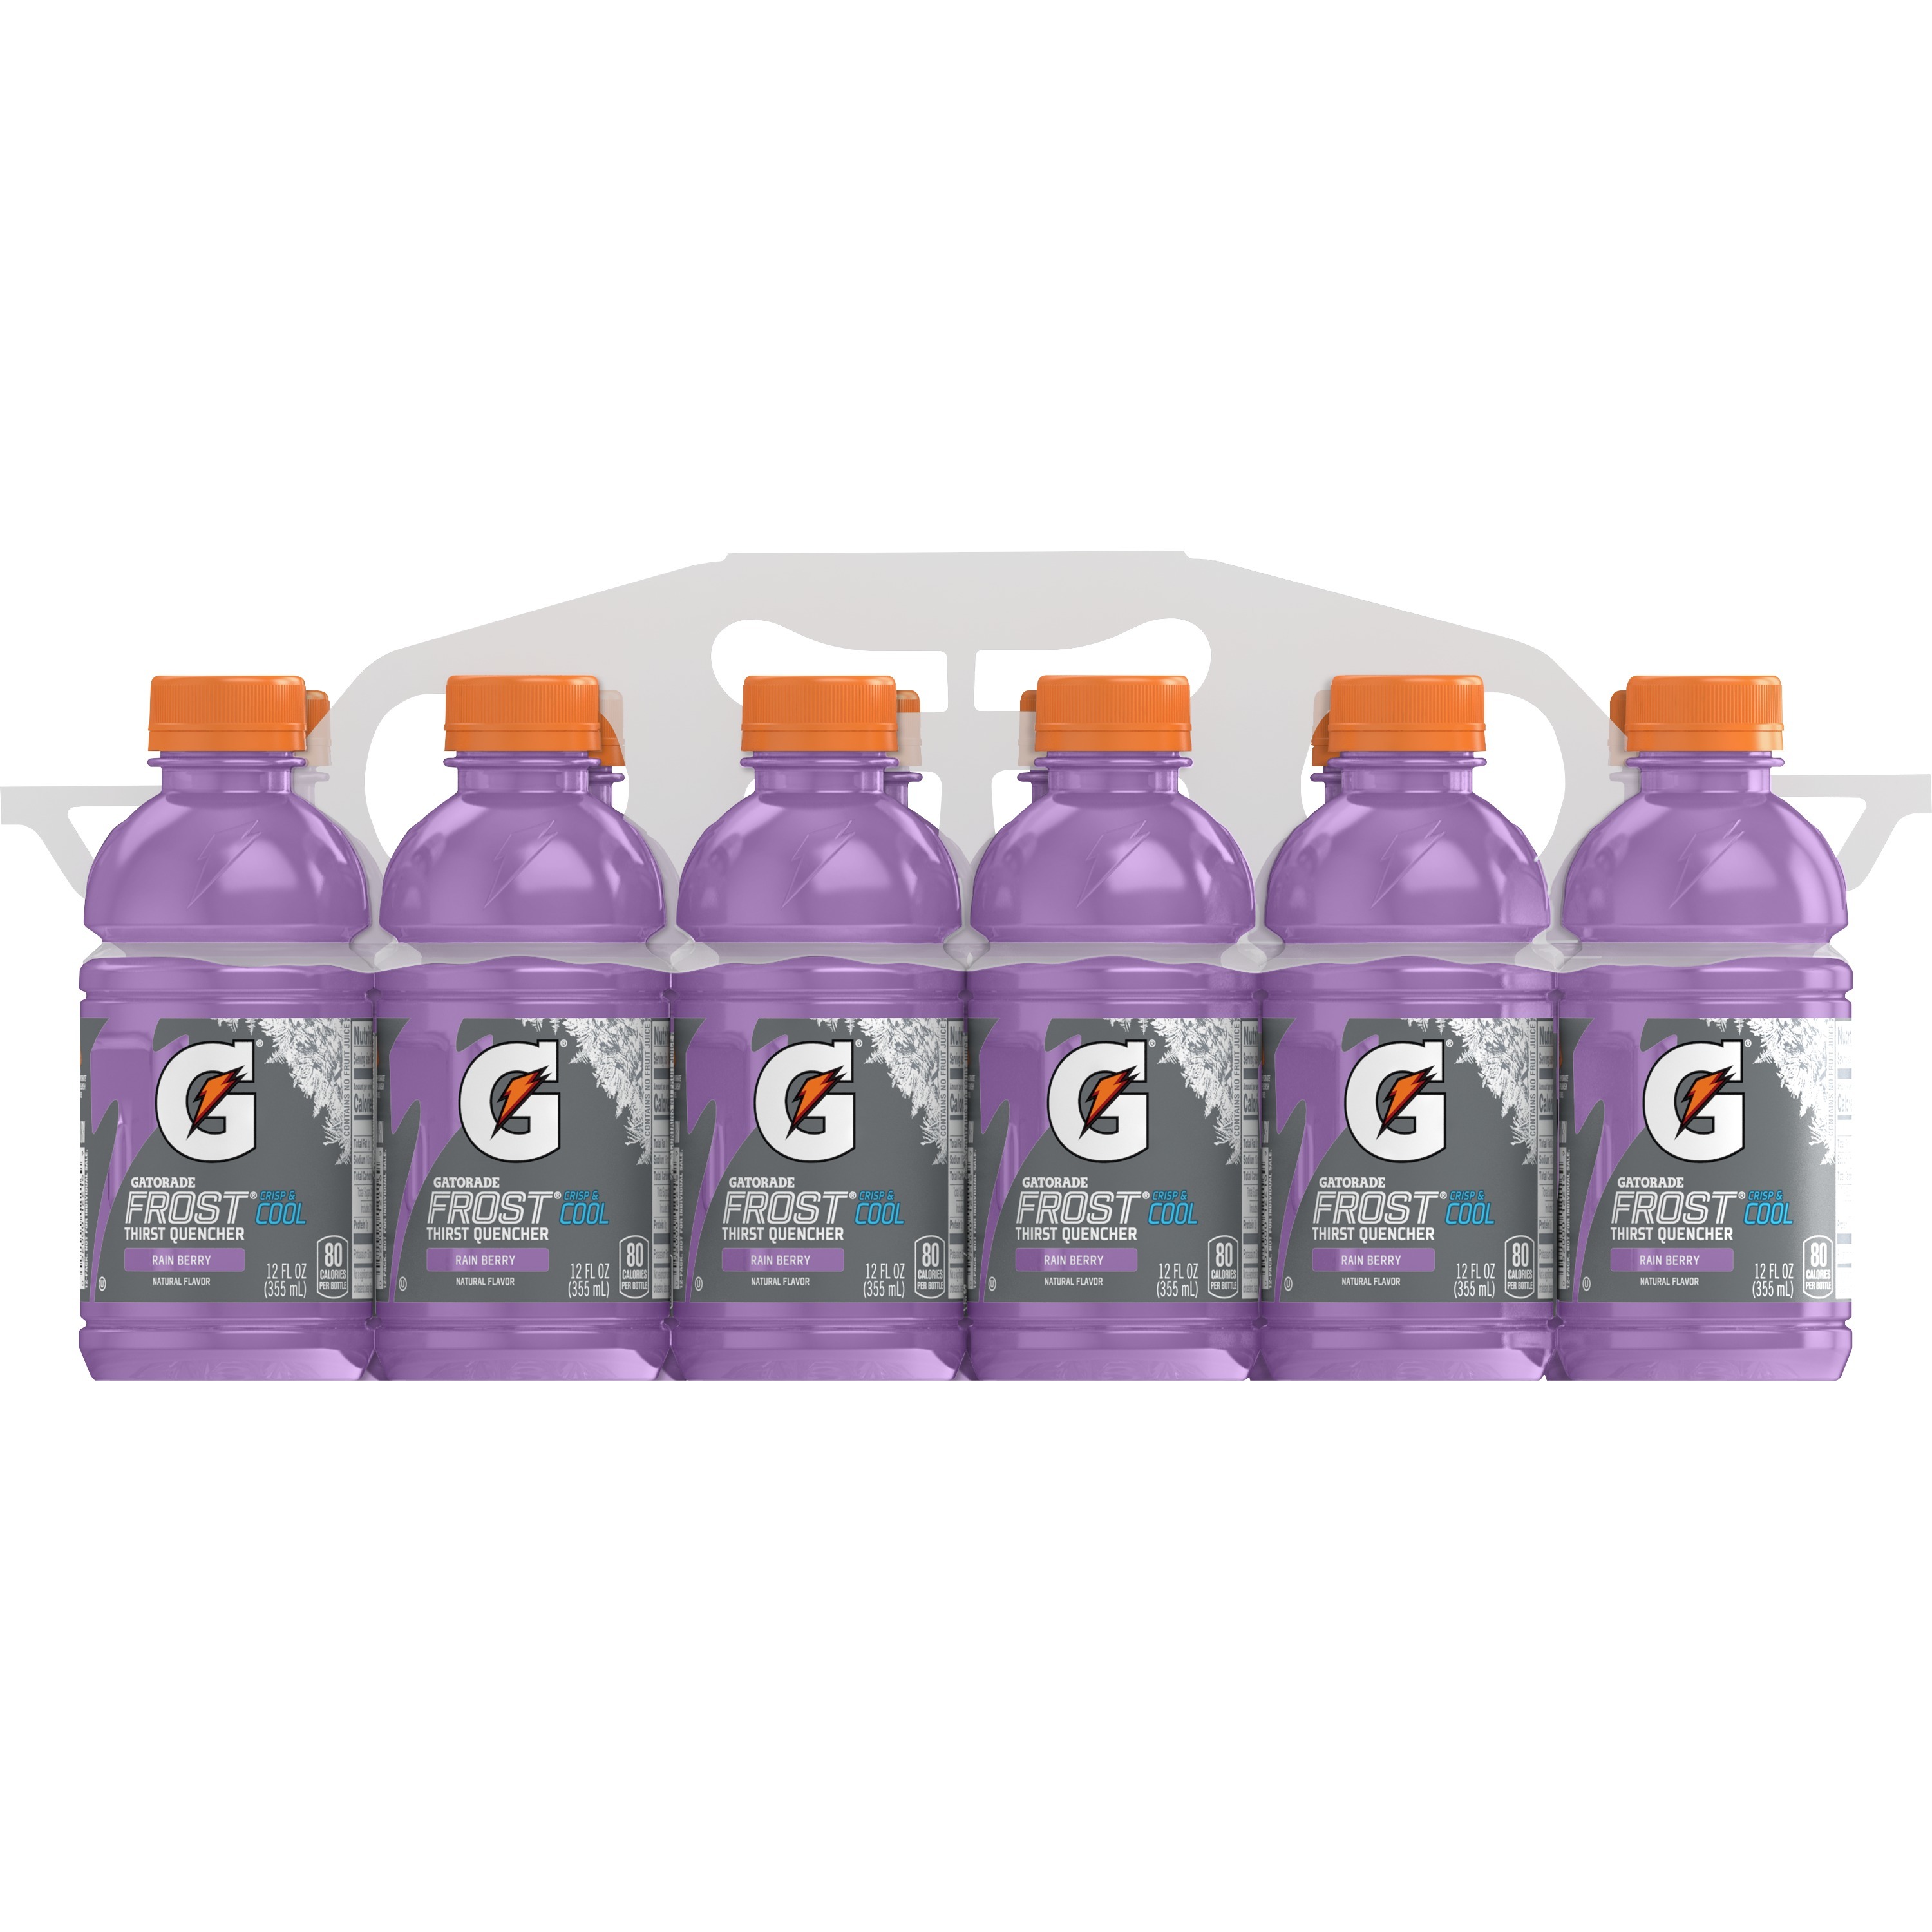 Gatorade Frost Thirst Quencher Rain Berry Sports Drink, 12 fl oz, 12 Count Bottles - image 1 of 8